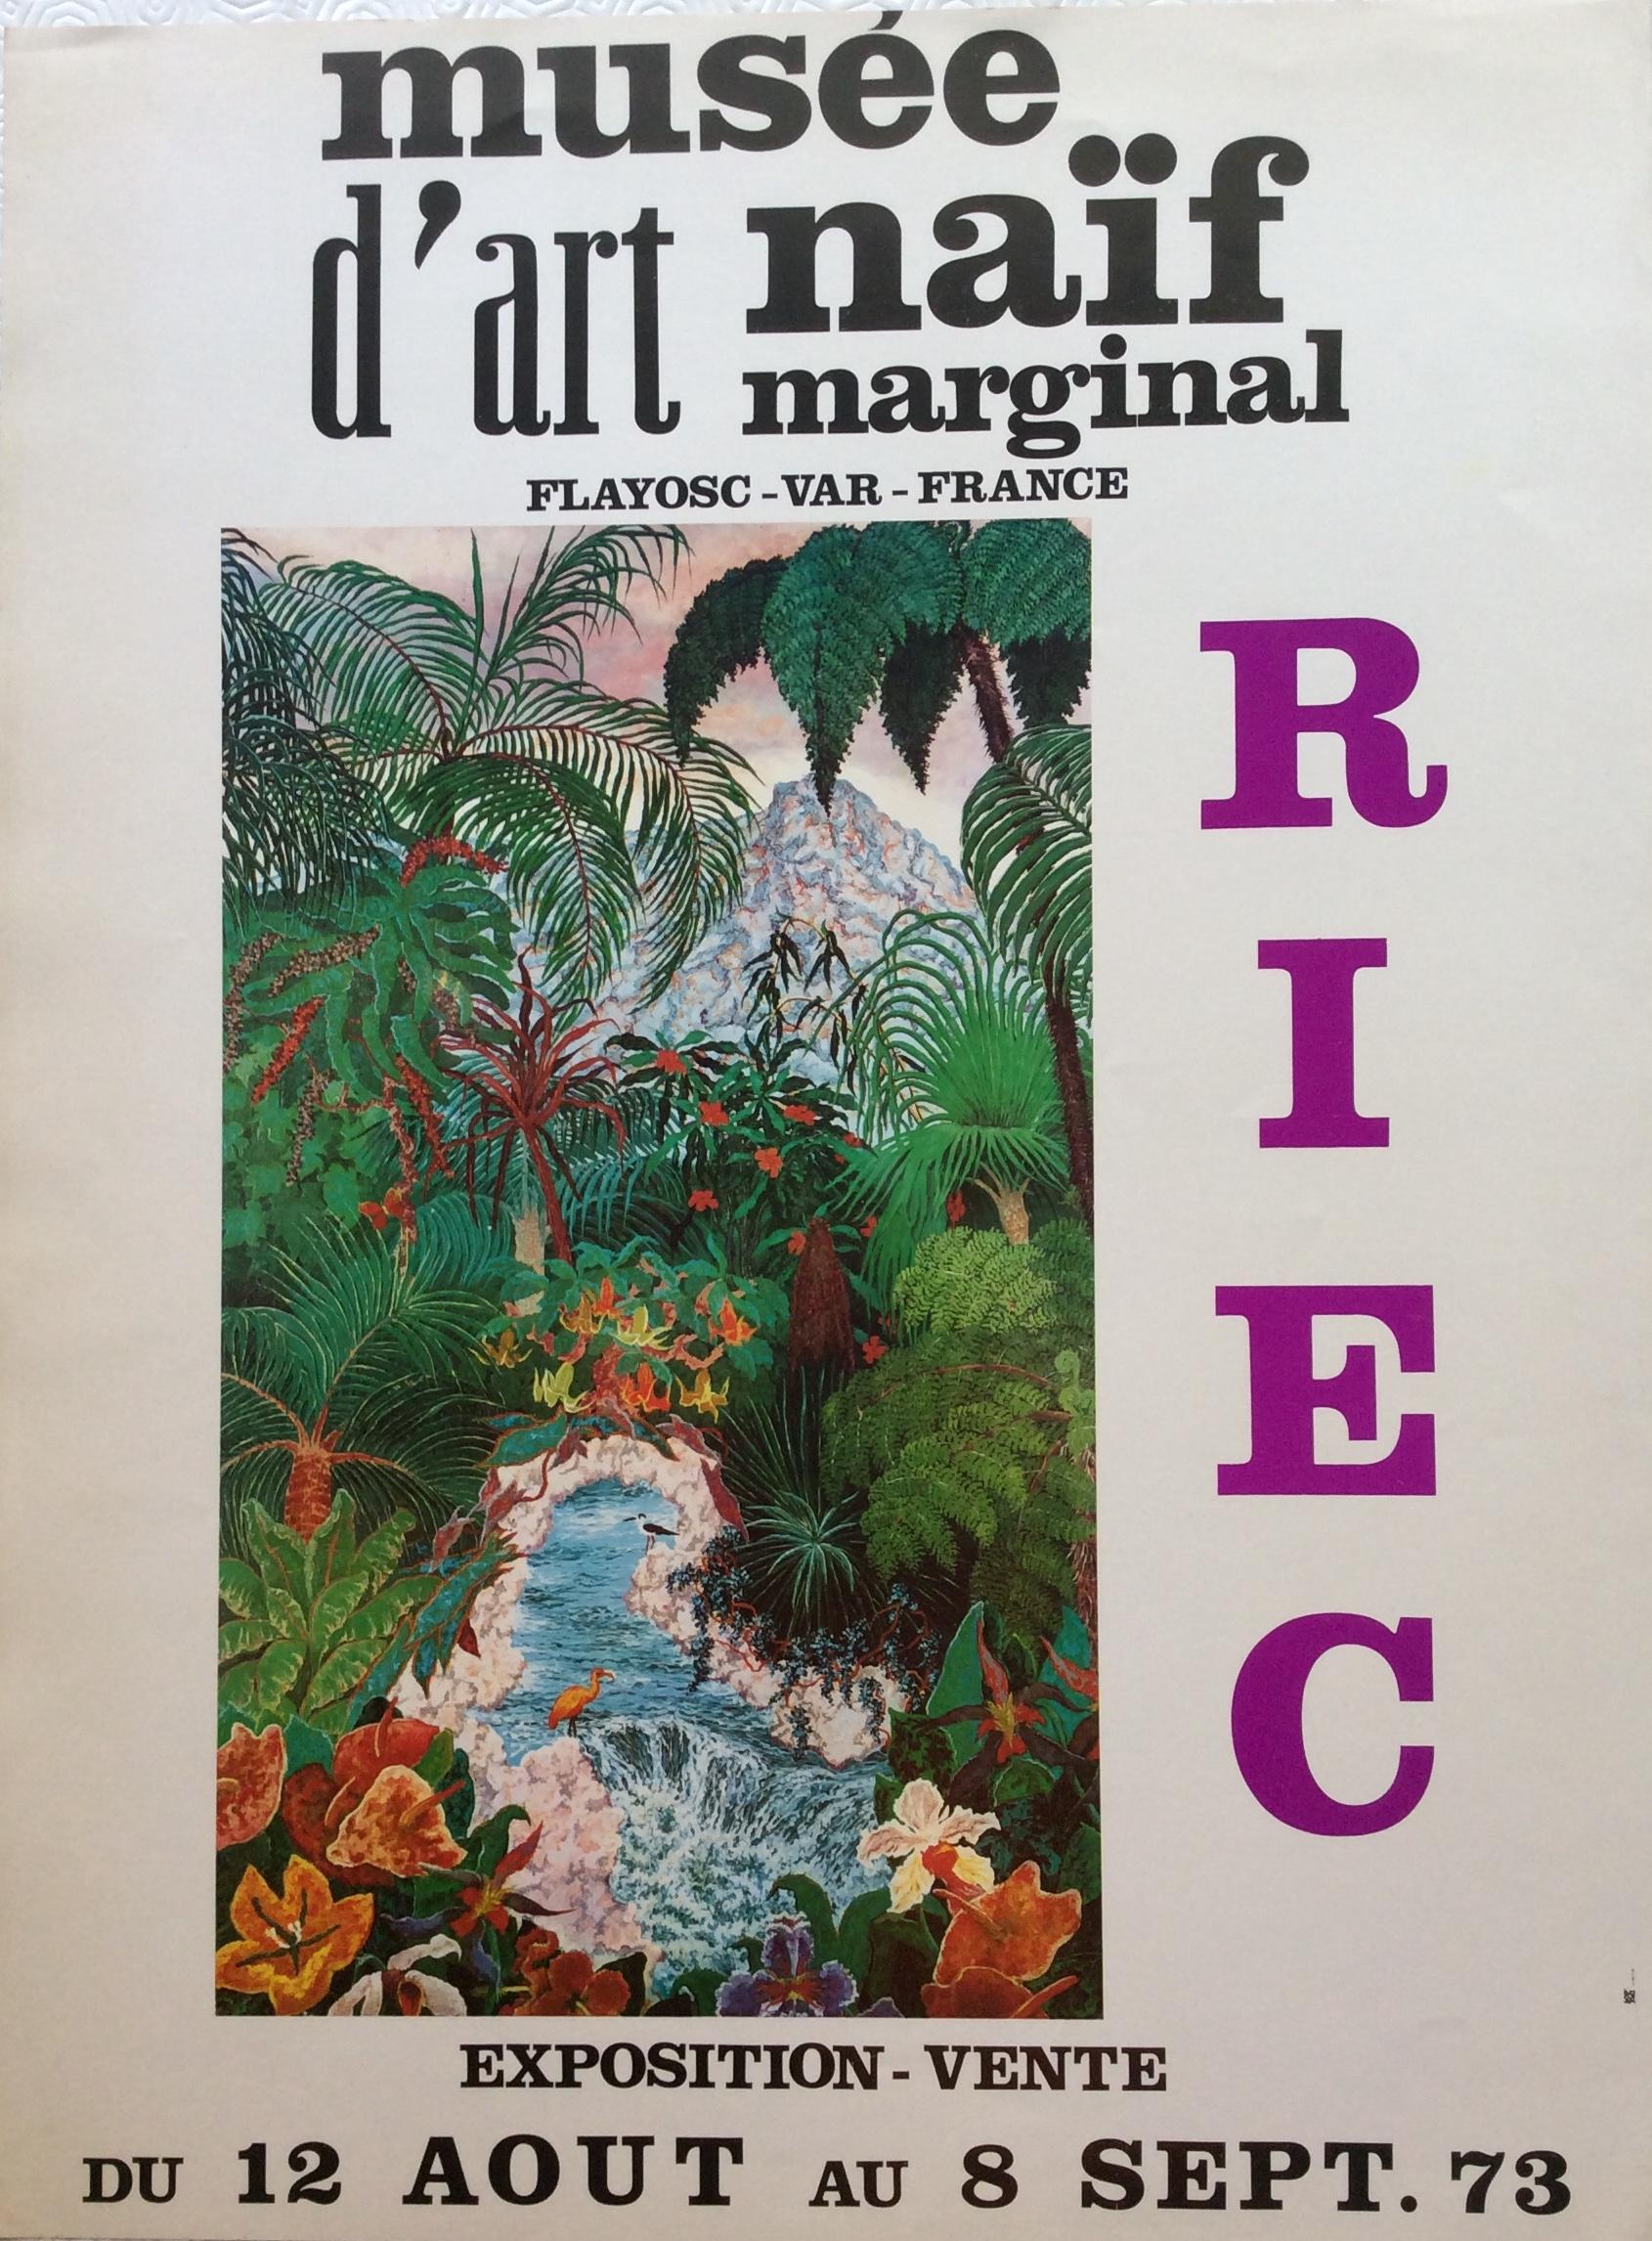 20th Century 1970s Landscape Art Exhibition Poster from Musee d'Art Naif Marginal